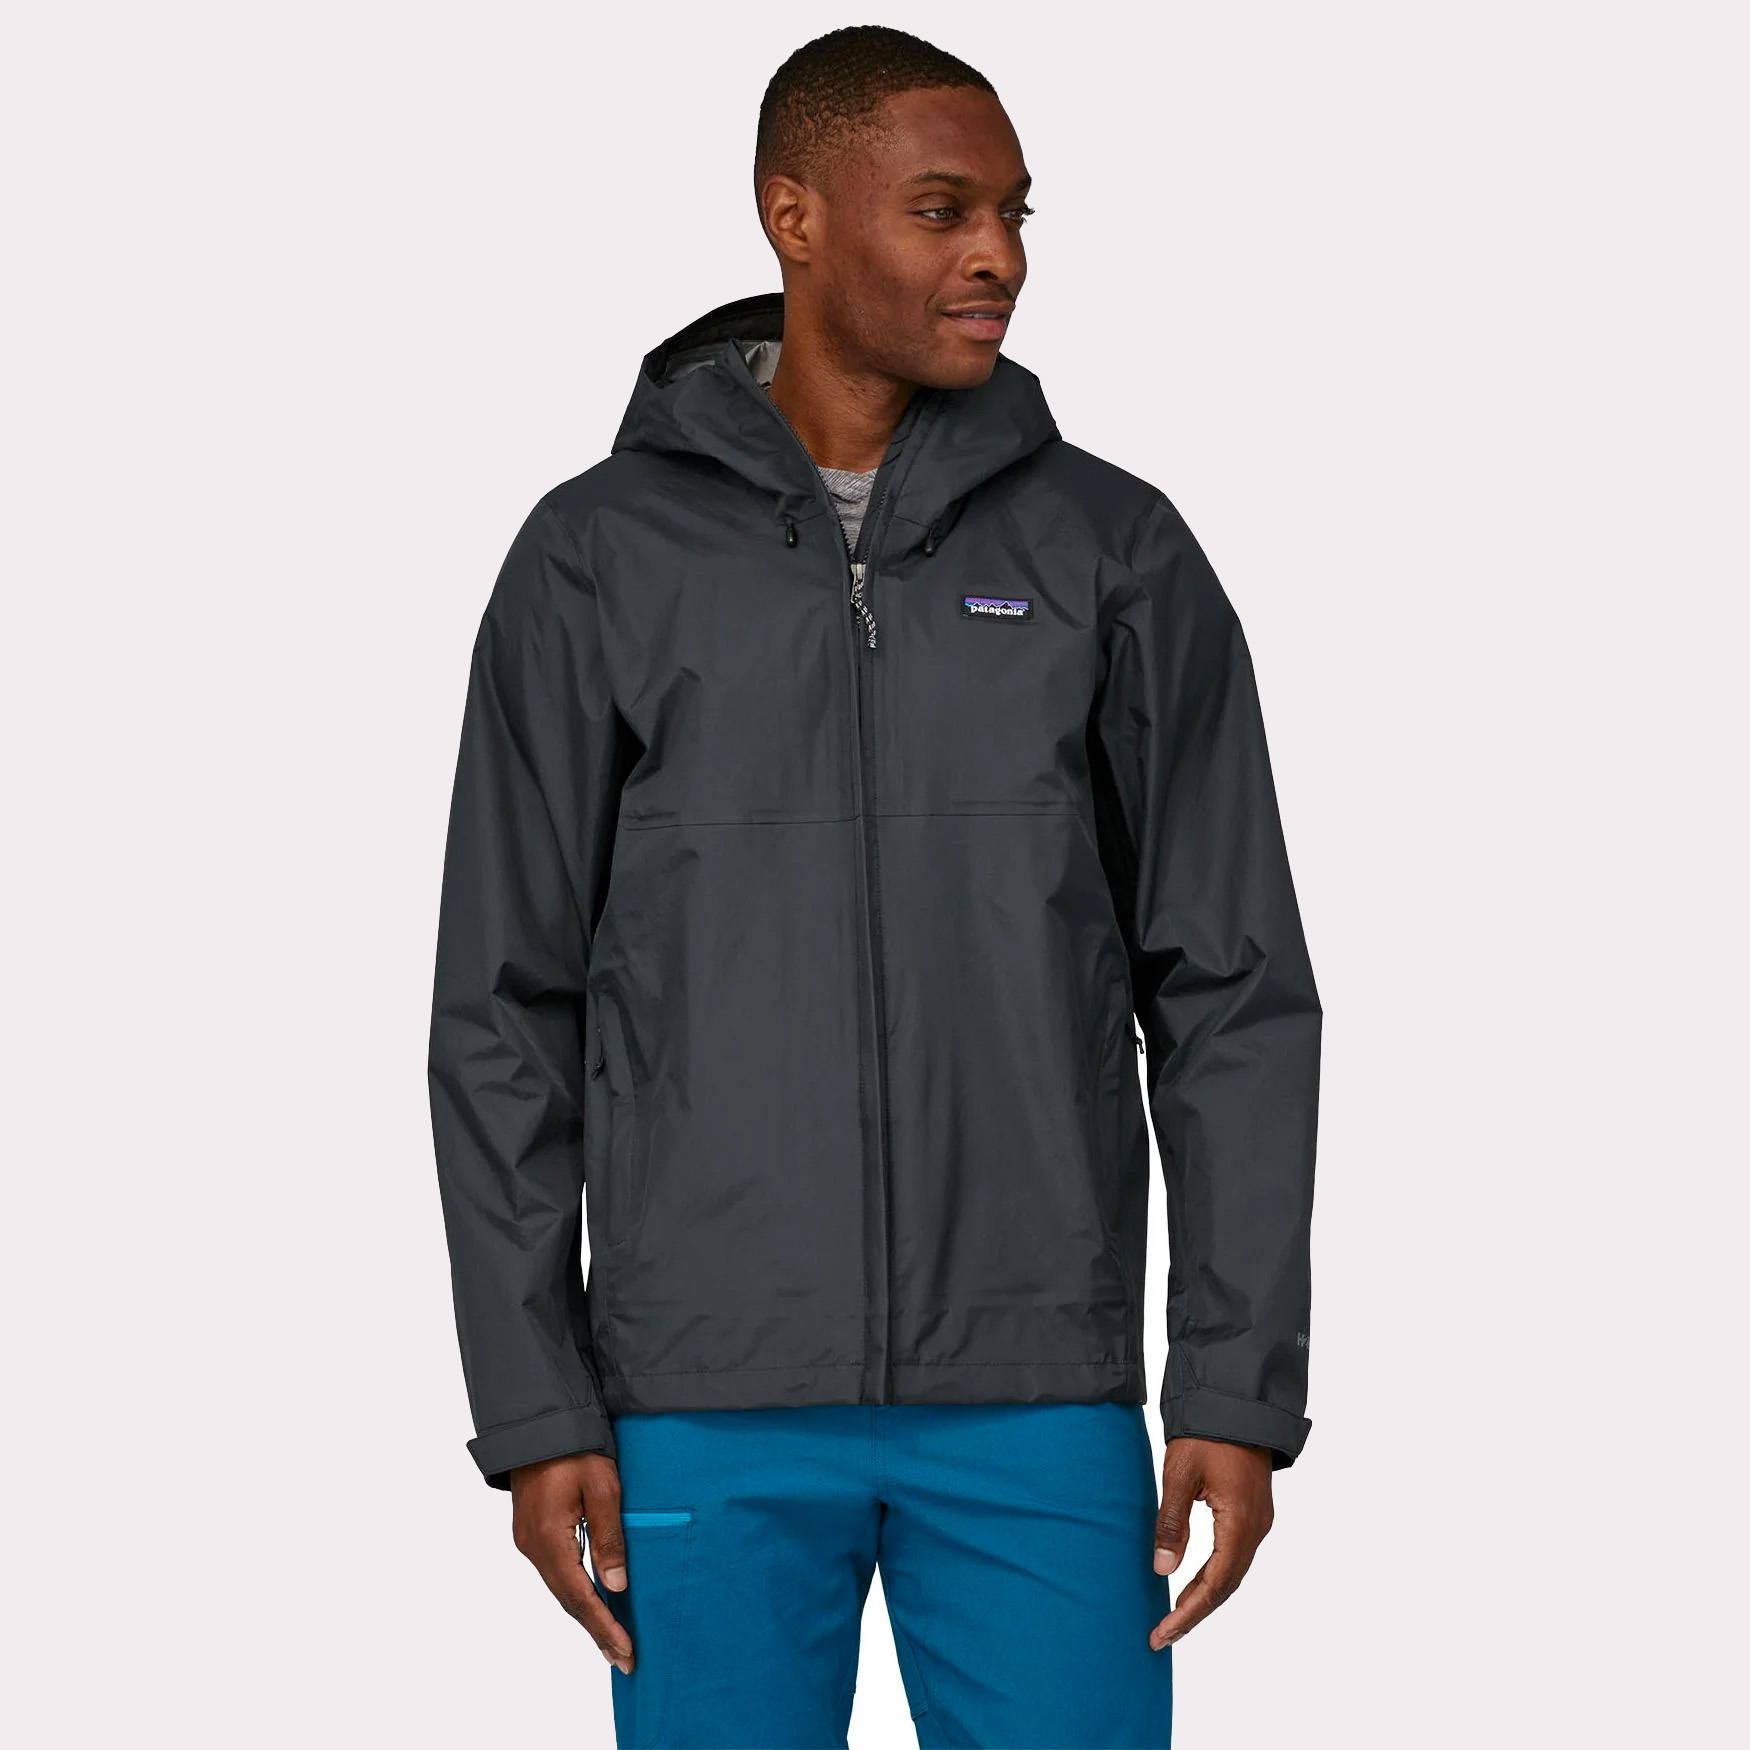 A model wearing a Patagonia sustainable jacket for men